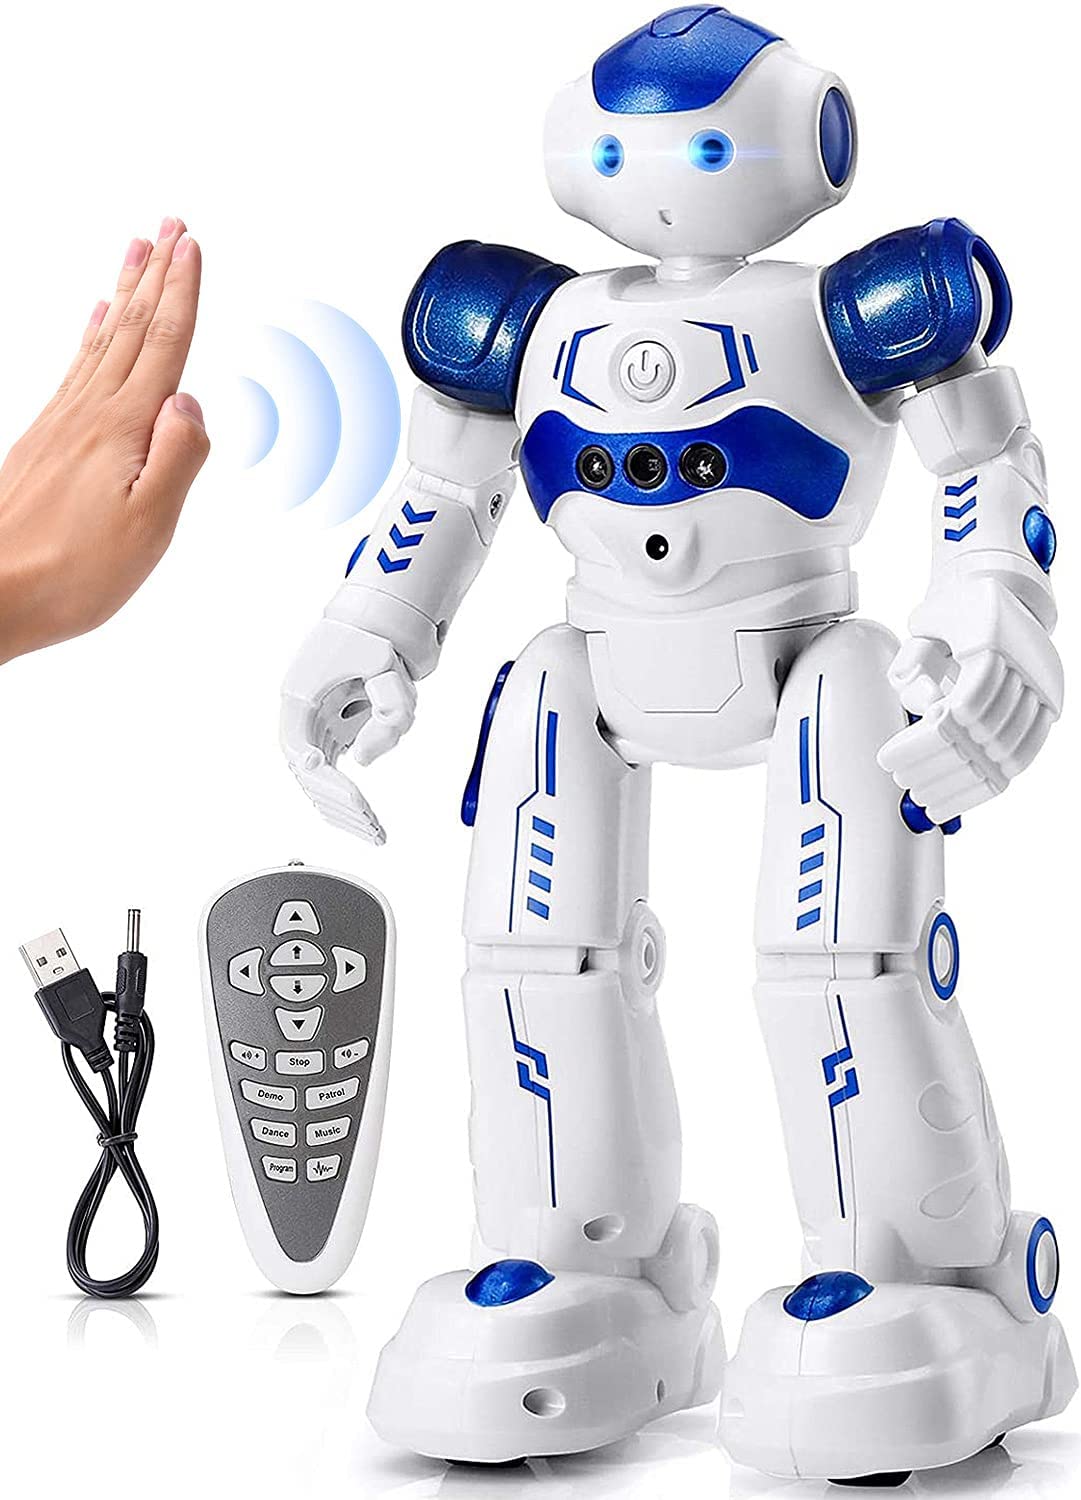 Review of KingsDragon RC Robot Toys for Kids (Gesture & Sensing Programmable Remote Control)